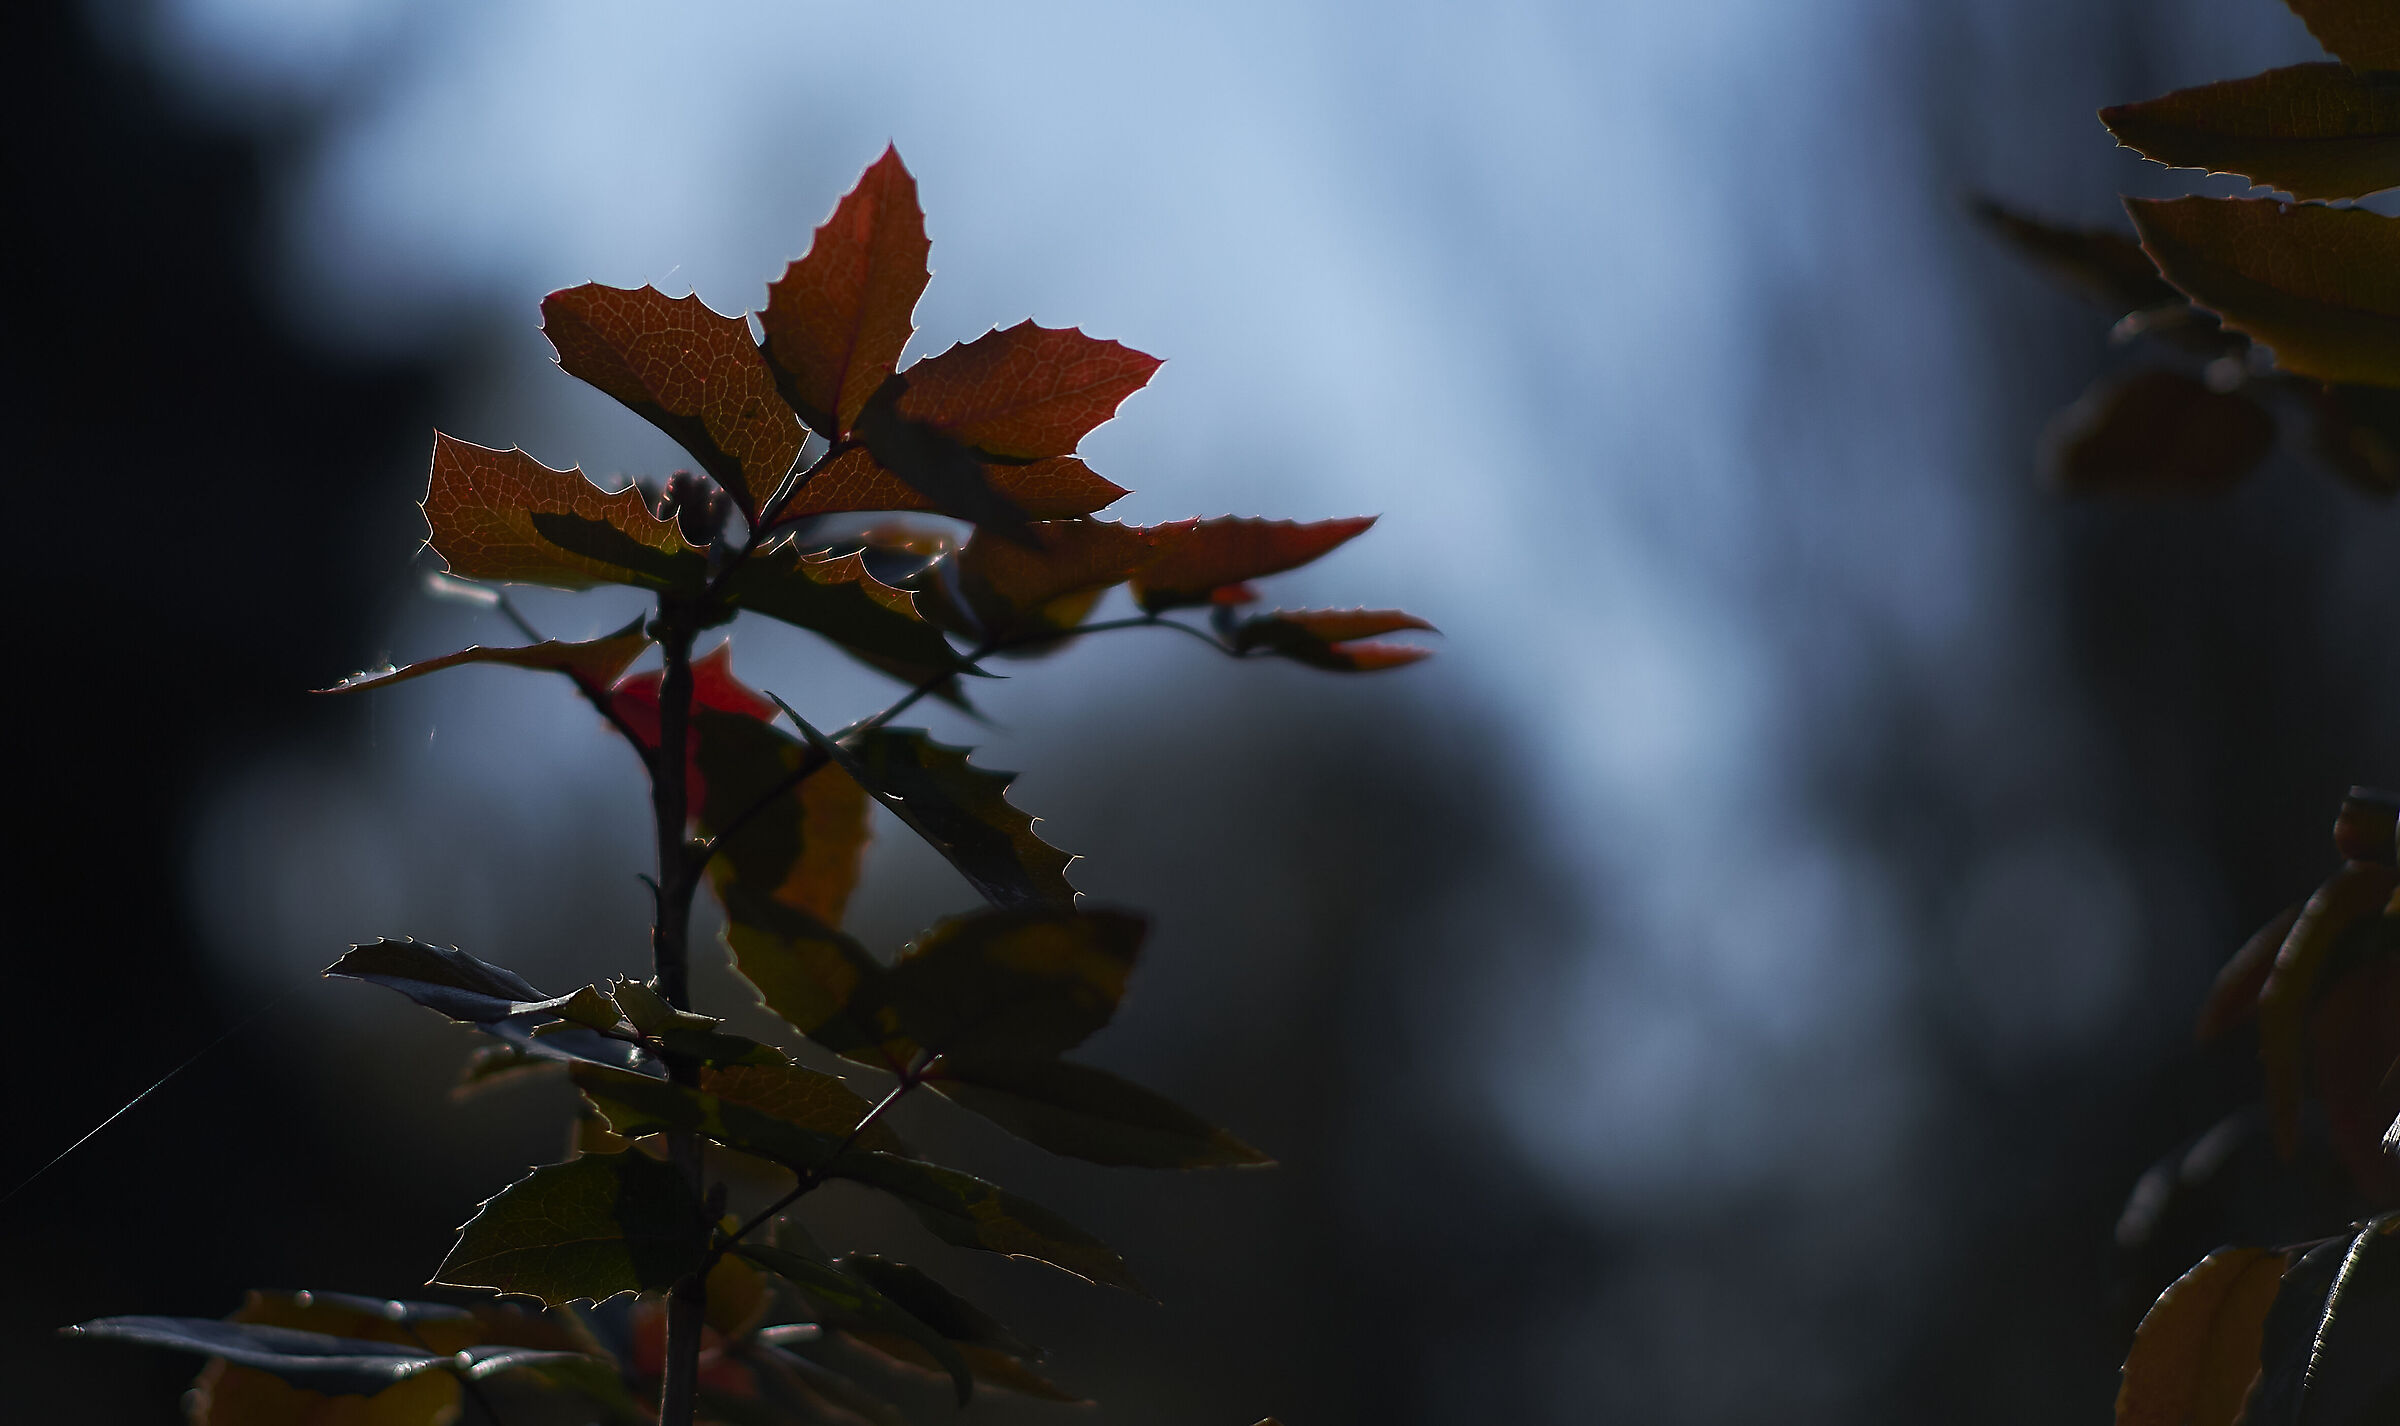 Test of bokeh and sharpness of TTArtisan 50mm f/1.2...